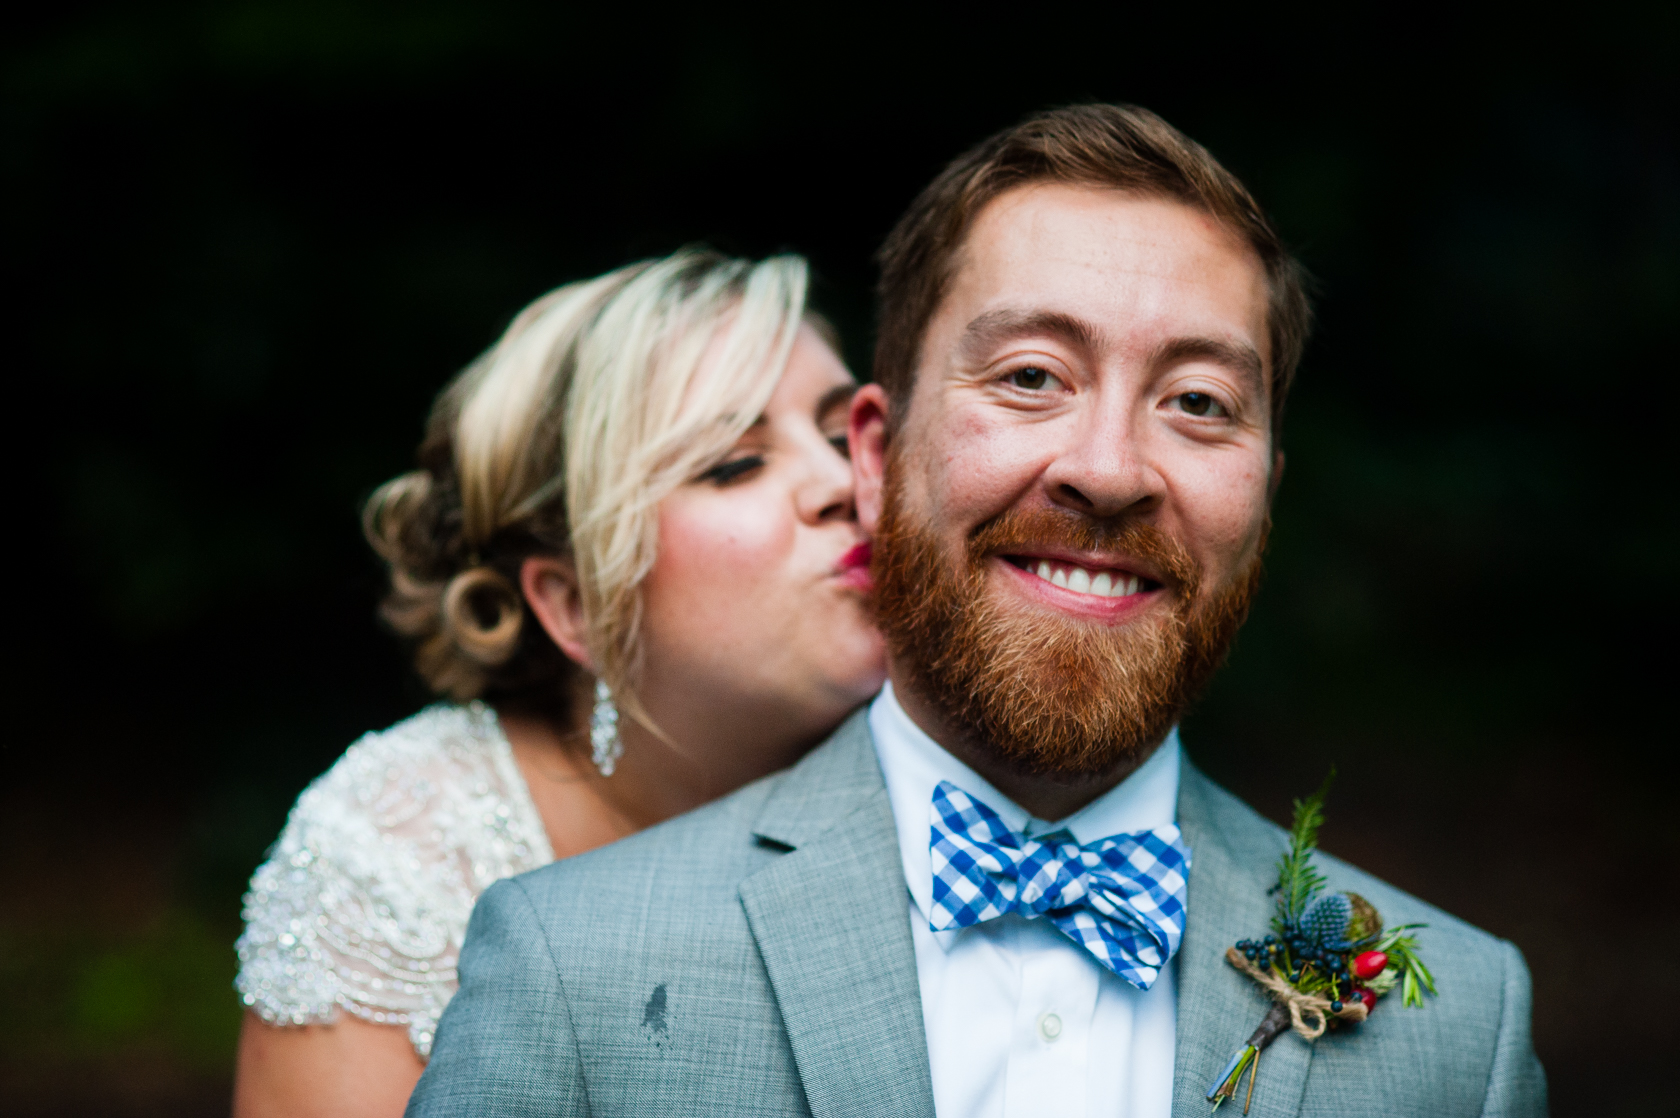 Beautiful bride gives her groom a kiss on the cheek during their wedding a beautiful summer camp wedding